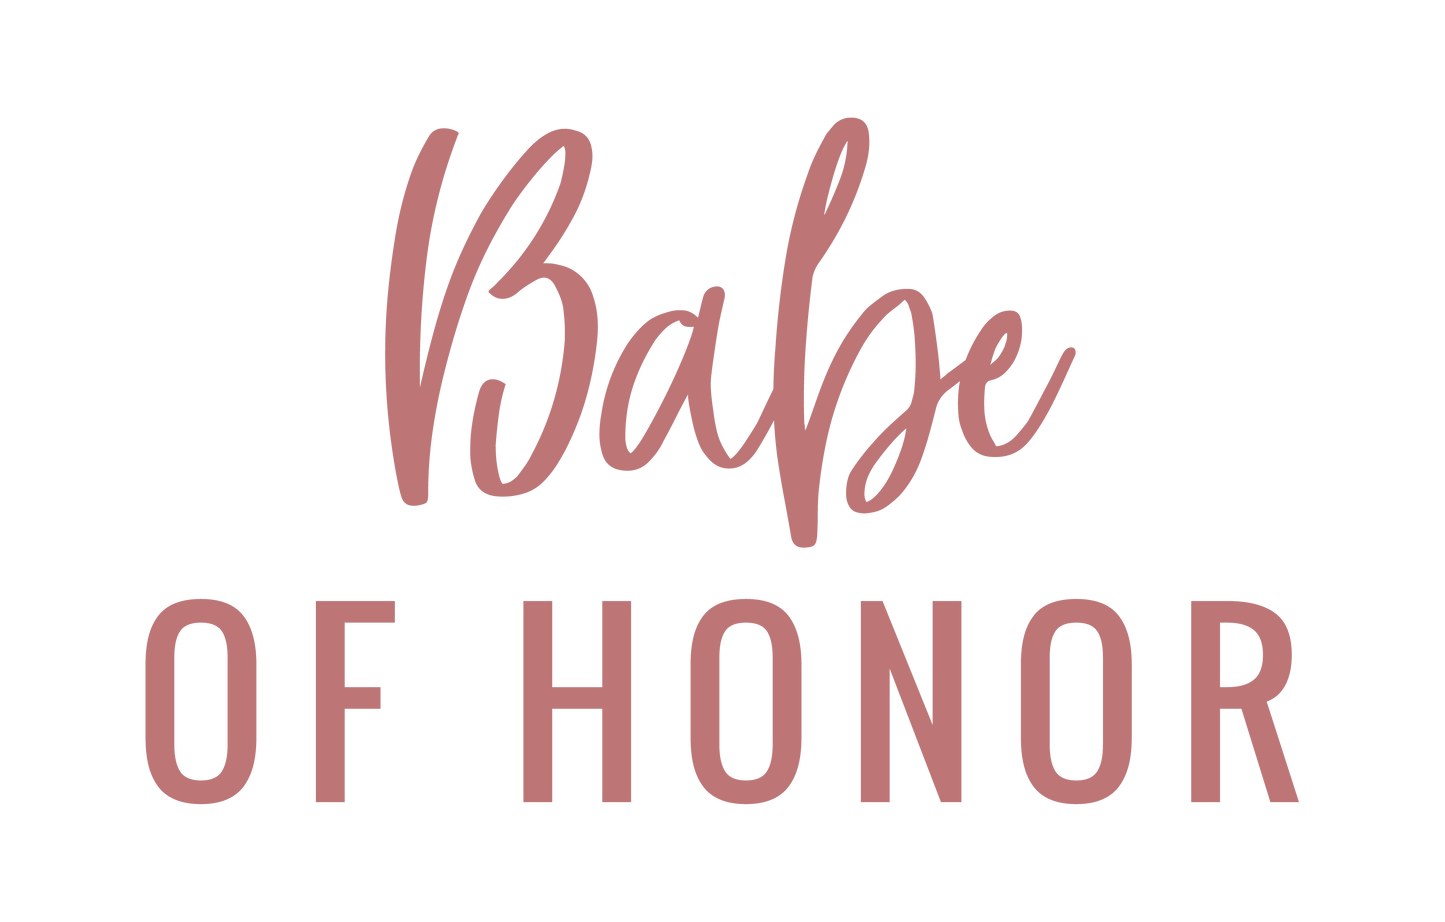 BABE OF HONOR